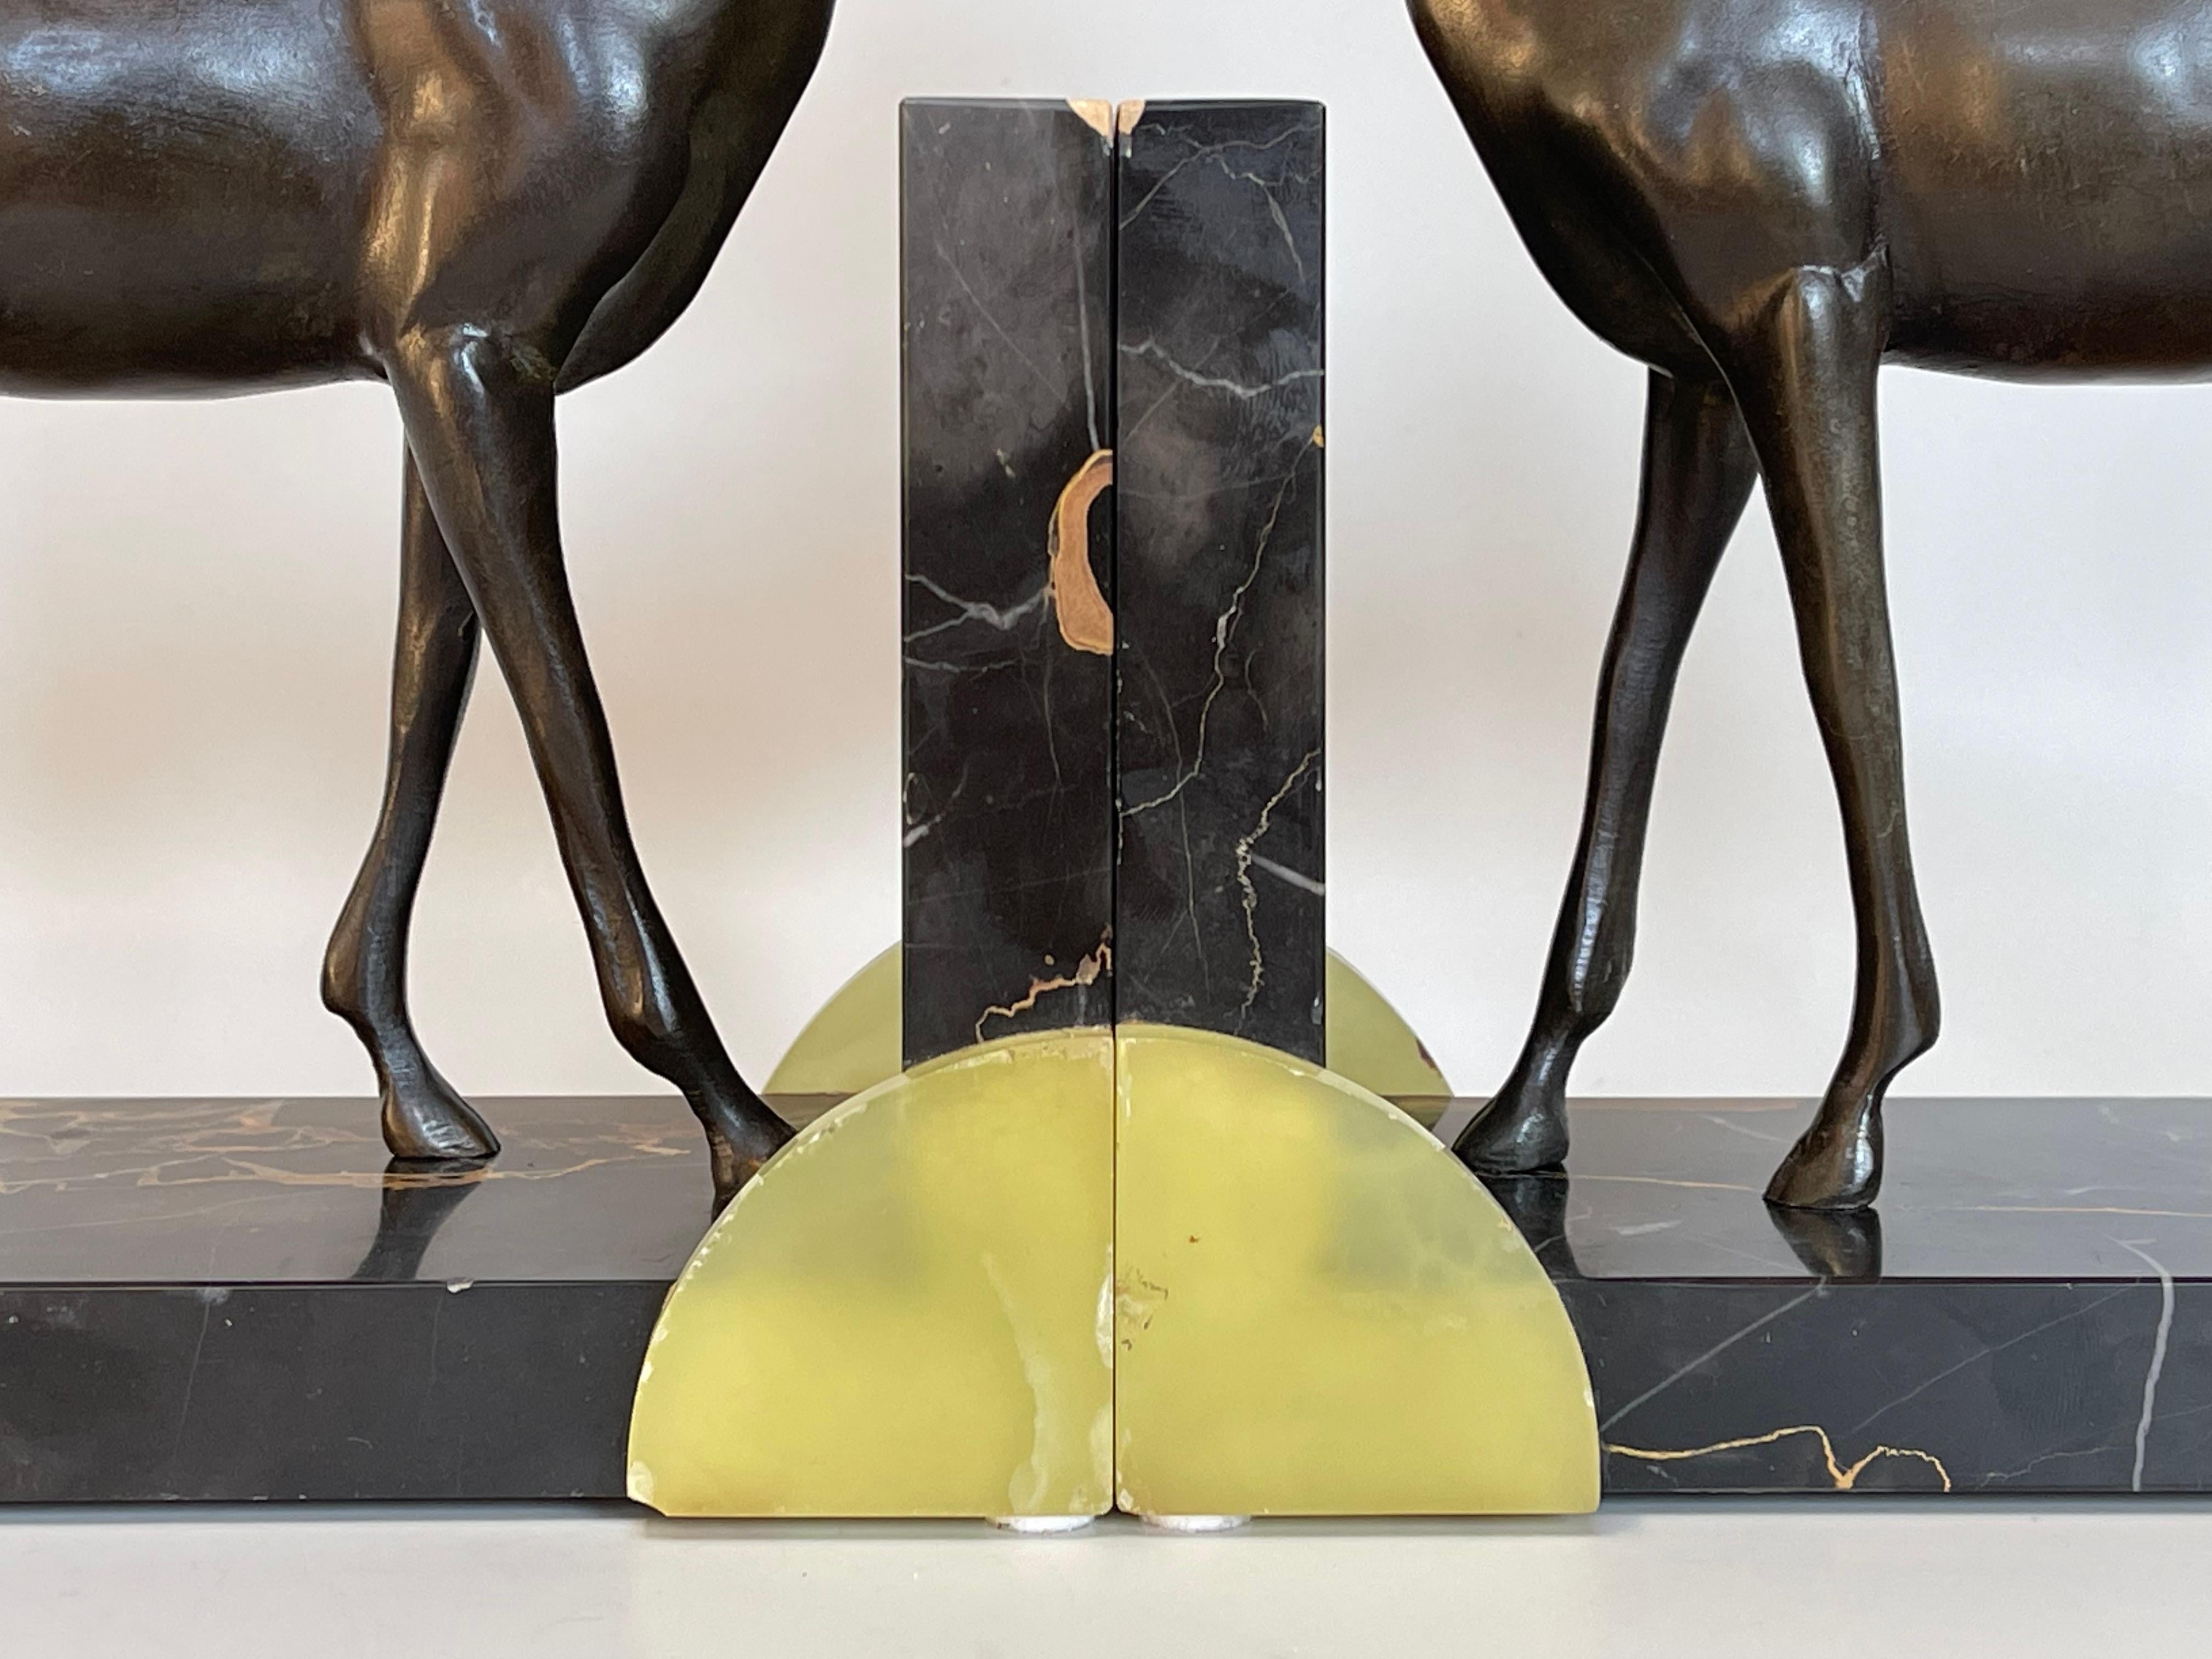 Large pair of spelter bookends around 1930 by Jacques Limousin.
Antelope on a portor marble base and onyx application.
Signed Limousin on the base.
In very good state of conservation.
Small chips on the onyx are to be noted.
Length: